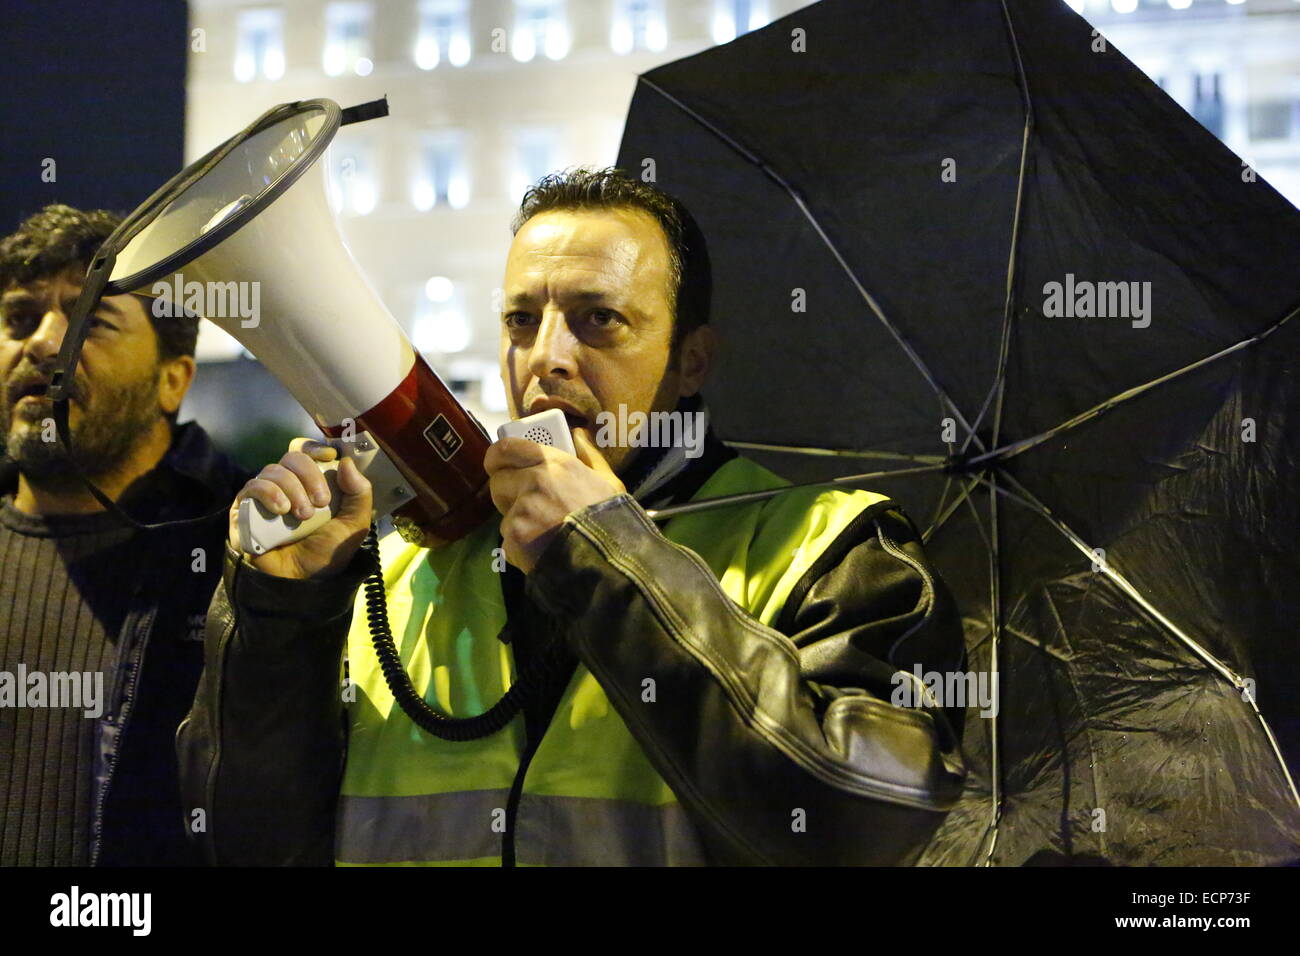 Athens, Greece. 17th December 2014. Protesters shout slogans against the Greek Government outside the Greek Parliament. Greeks opposed to the current government protested outside the Parliament while the parliamentarians inside went to the ballot box for the first ballot of the Greek Presidential election. The governmental candidate got only 160 of the required 200 votes. Credit:  Michael Debets/Alamy Live News Stock Photo